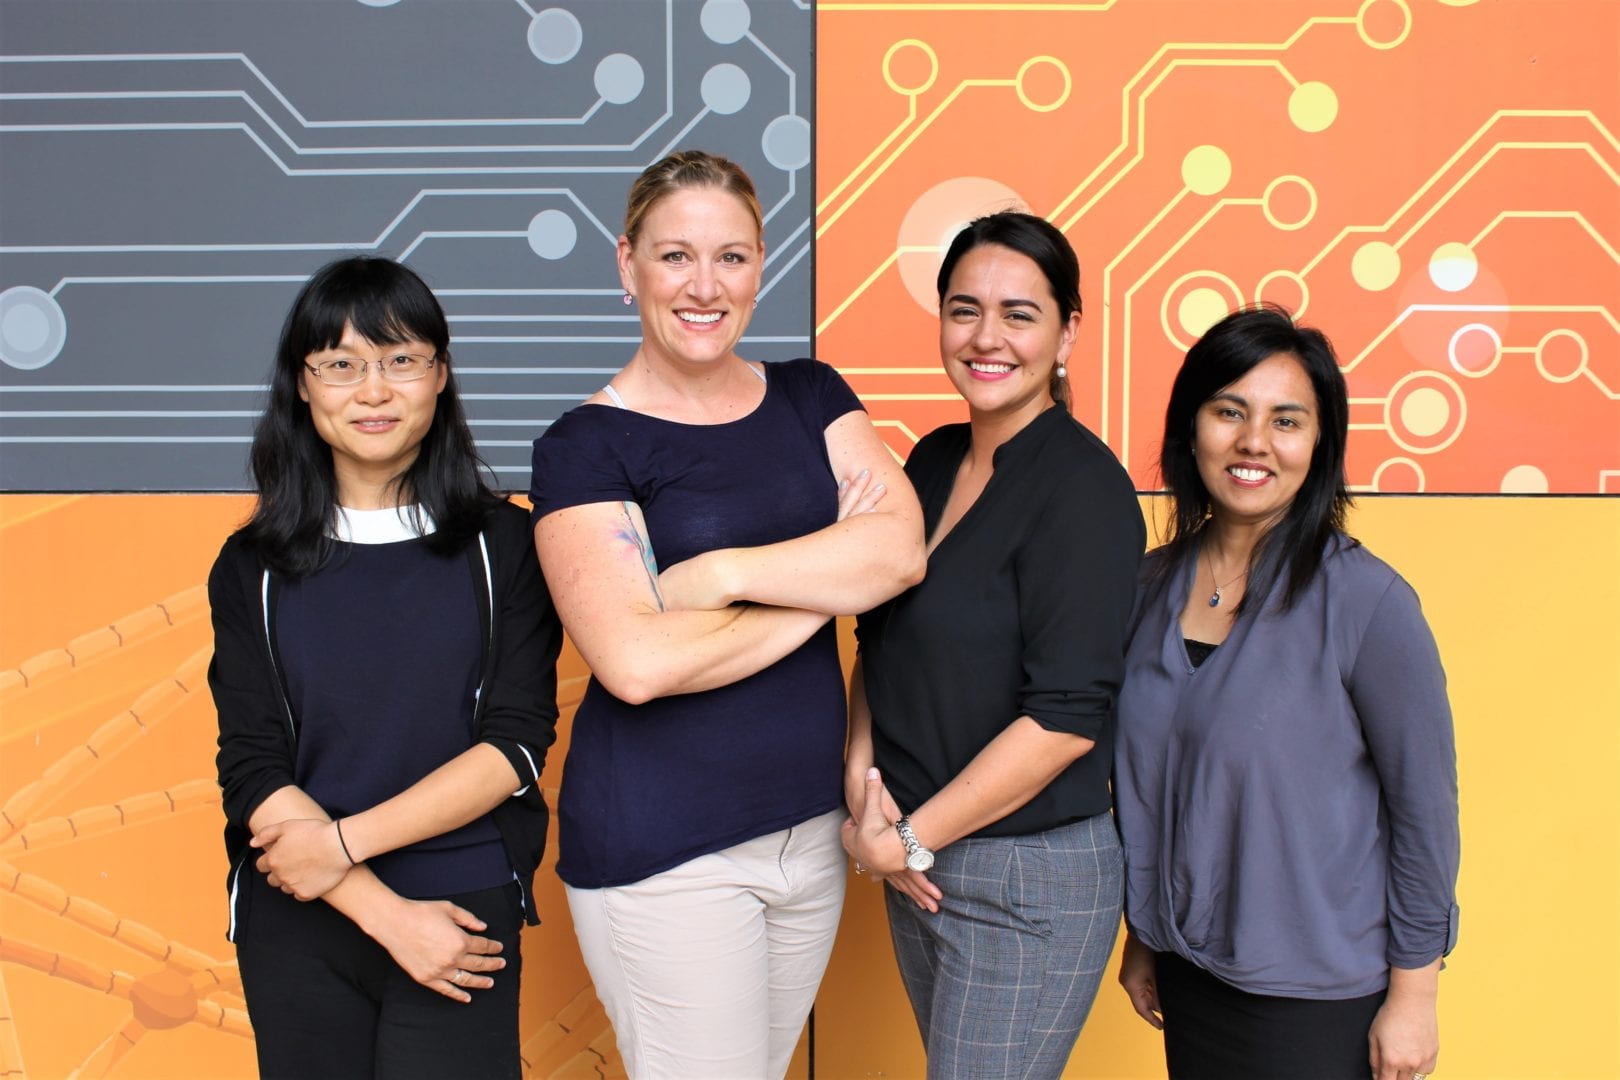 Four female researchers from Curtin